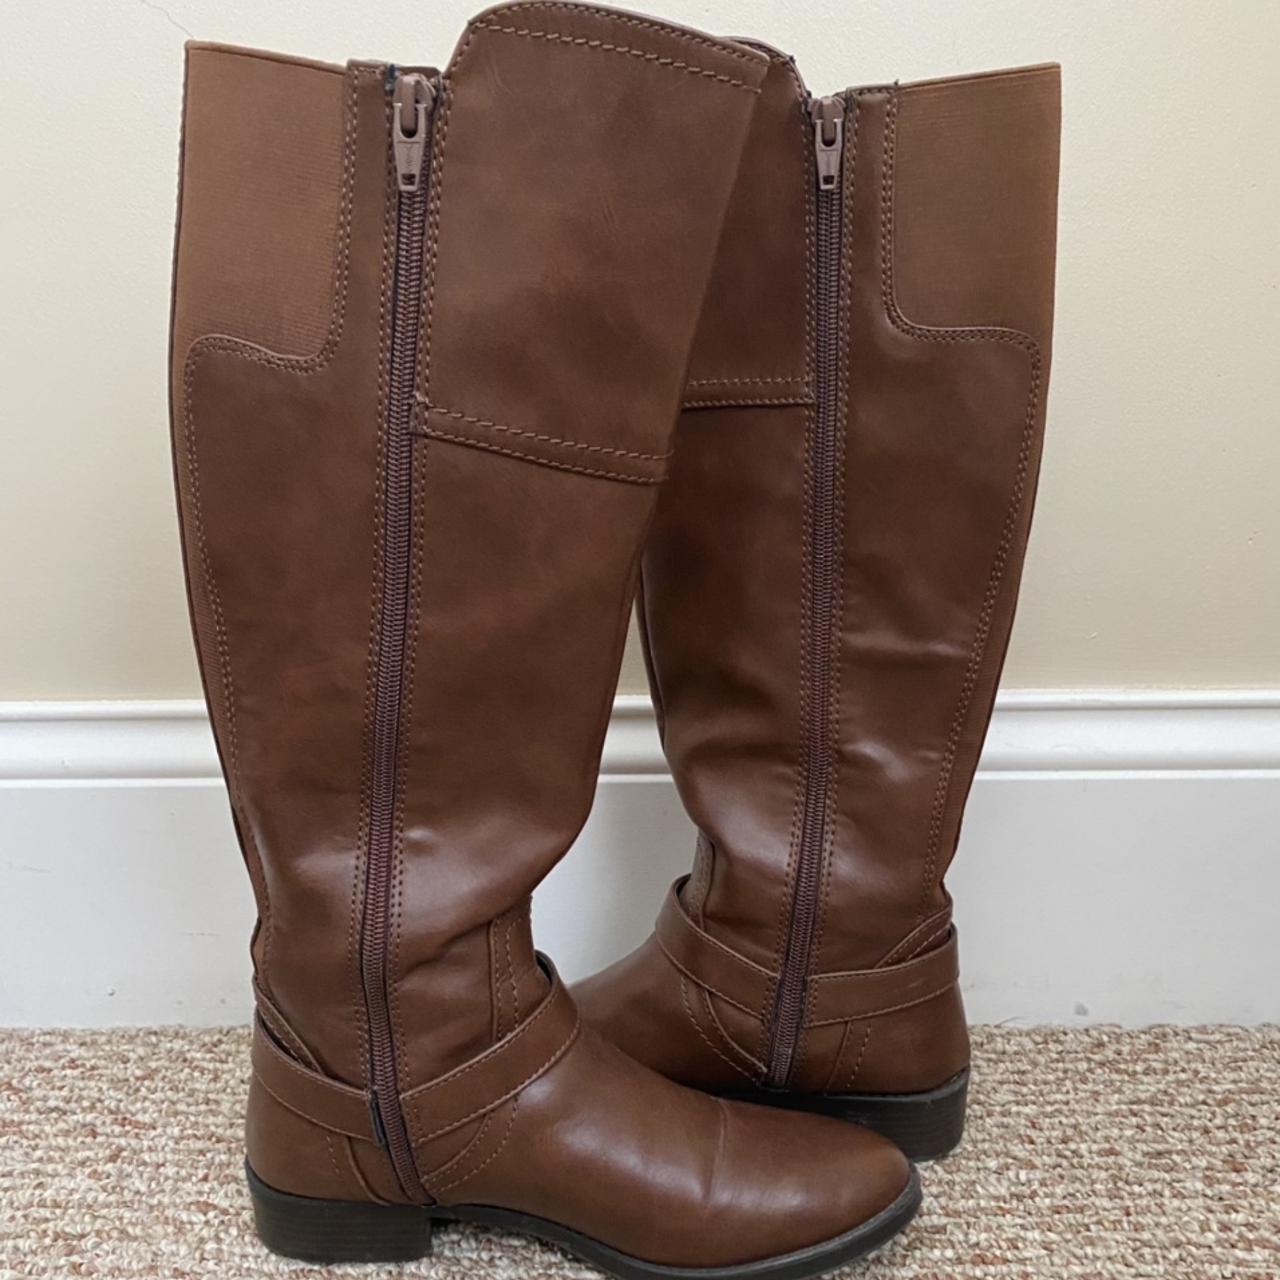 Target Women's Brown and Gold Boots (2)